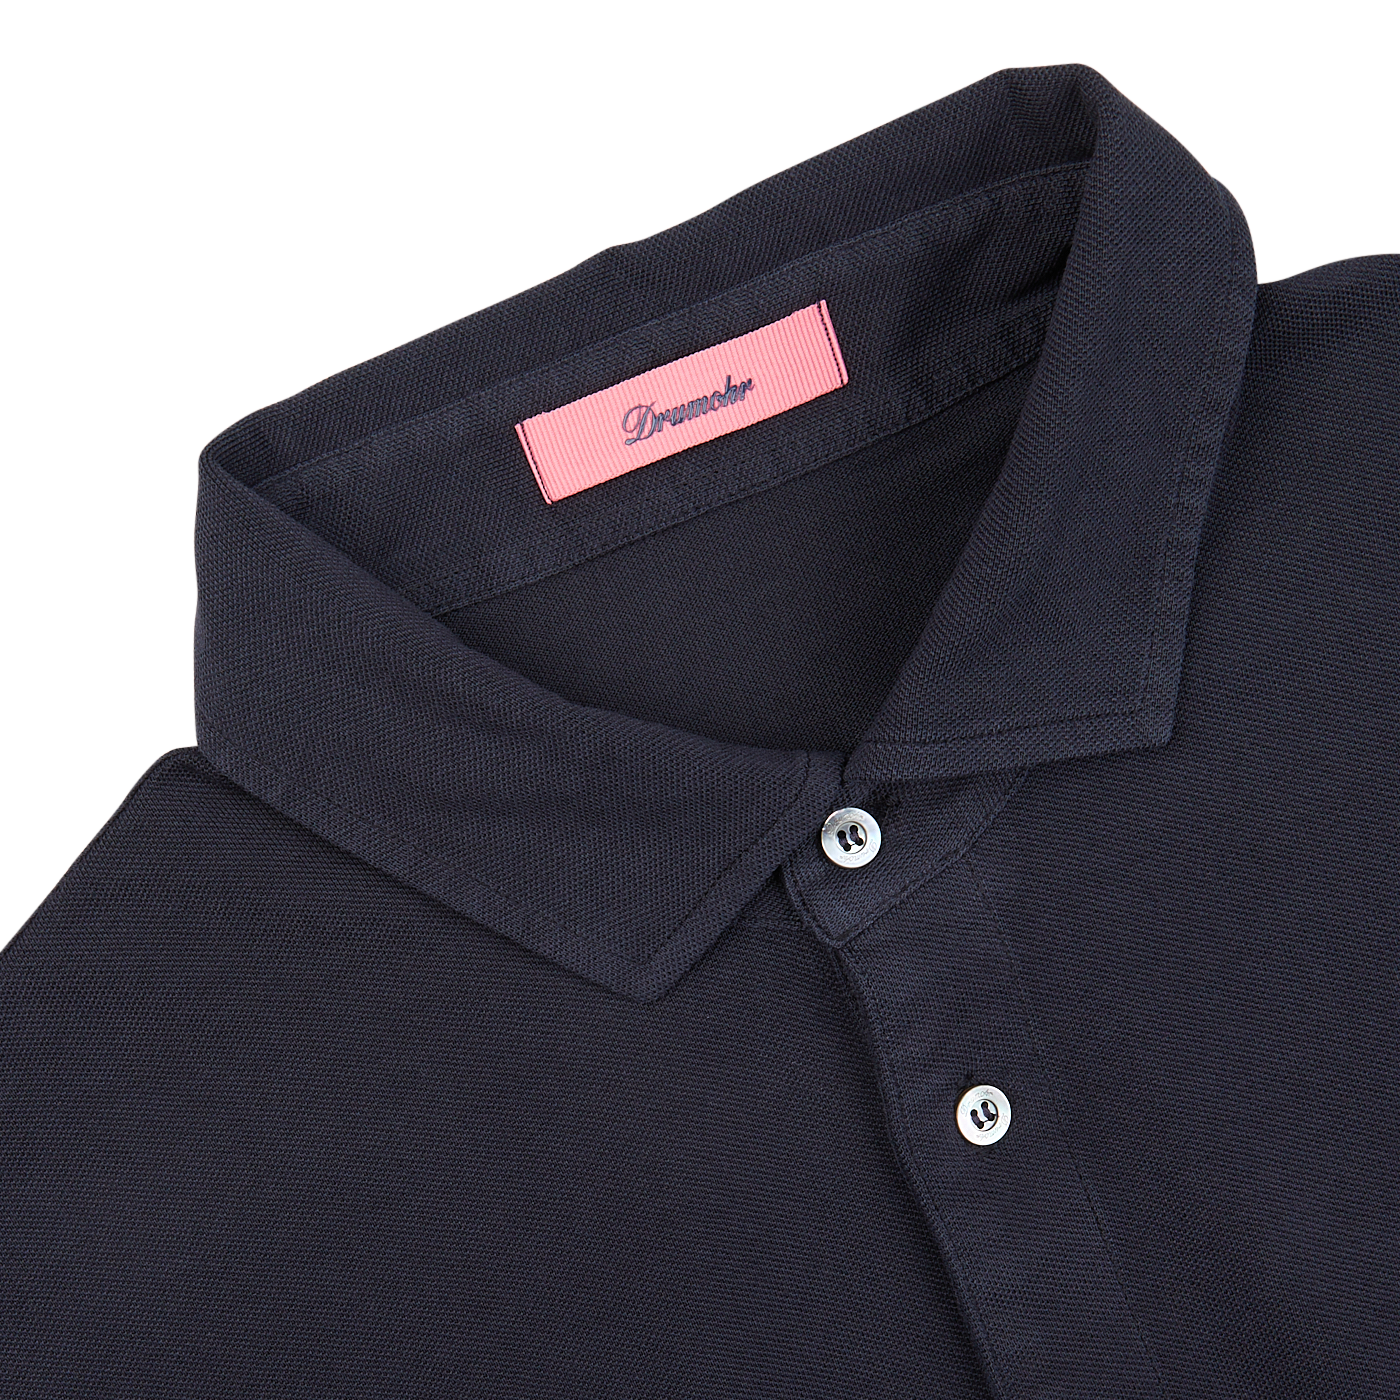 Close-up of a Navy Blue Cotton Piquet Polo Shirt with a pink Drumohr label on the collar, made in Italy.